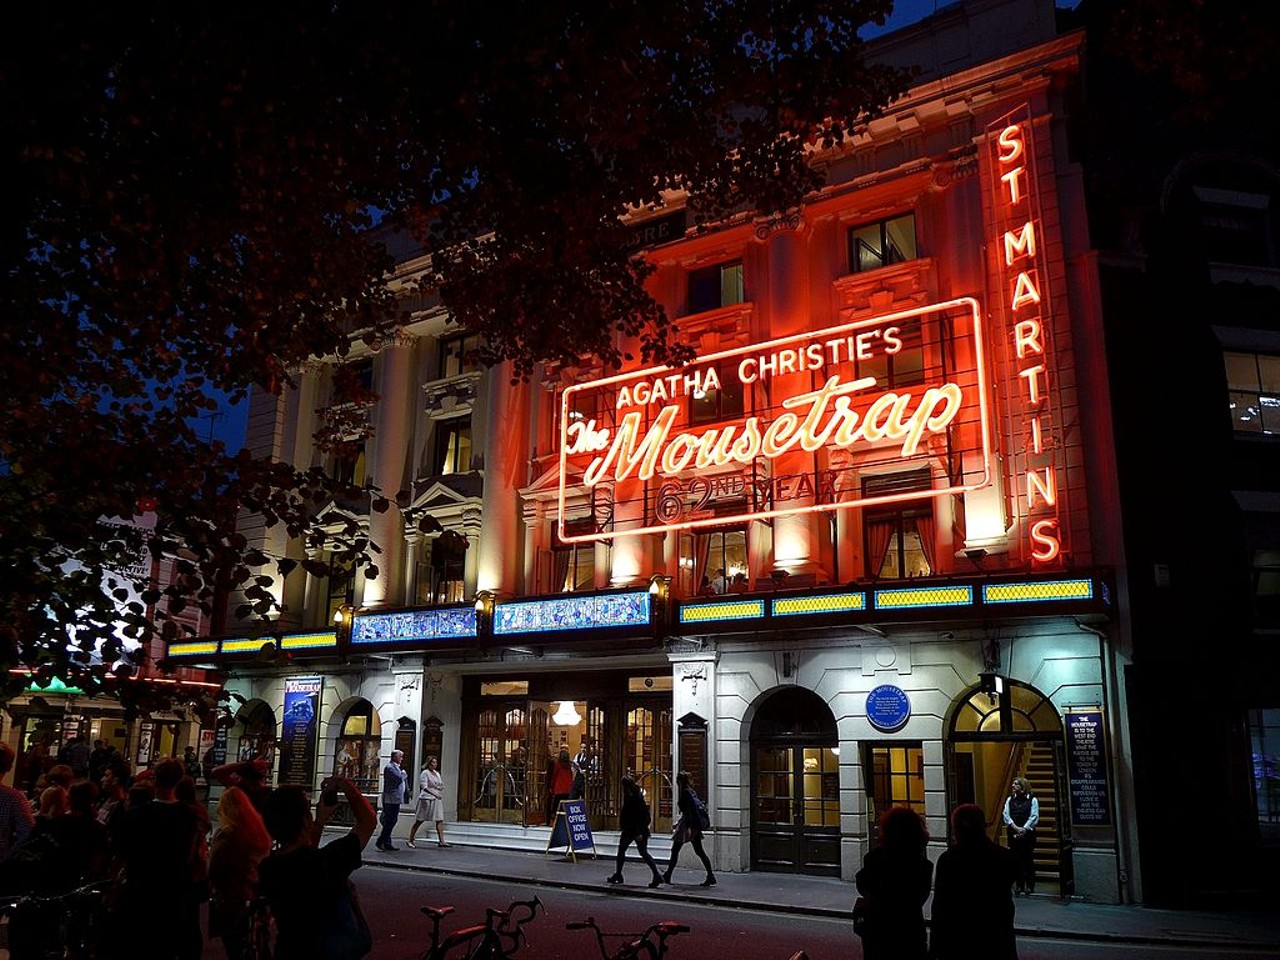  Agatha Christie's The Mousetrap opens at Stageworks Theatre in TampaThurs. Mar. 21Photo via Oxfordian Kissuth [CC BY-SA 3.0 (https://creativecommons.org/licenses/by-sa/3.0)]